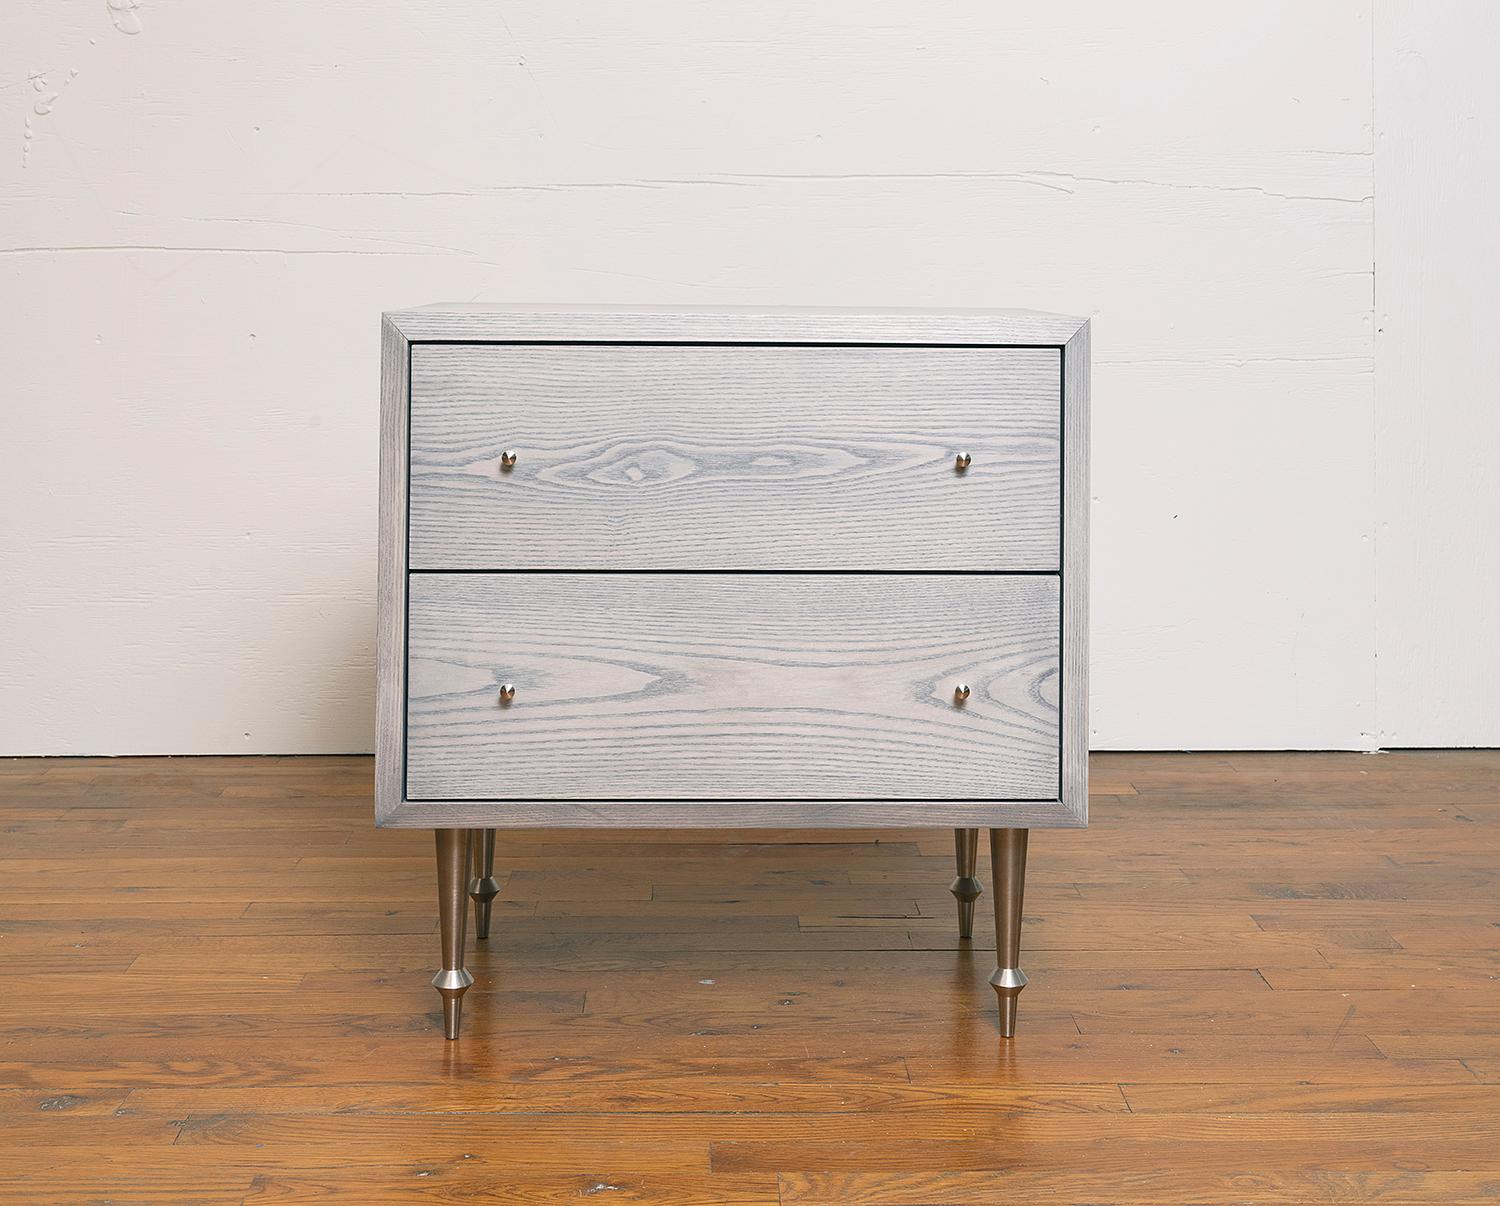 Solid ash with nickel plated legs and drawer pulls.
Greywashed finish.
Dimensions: 25” W x 16” D x 26